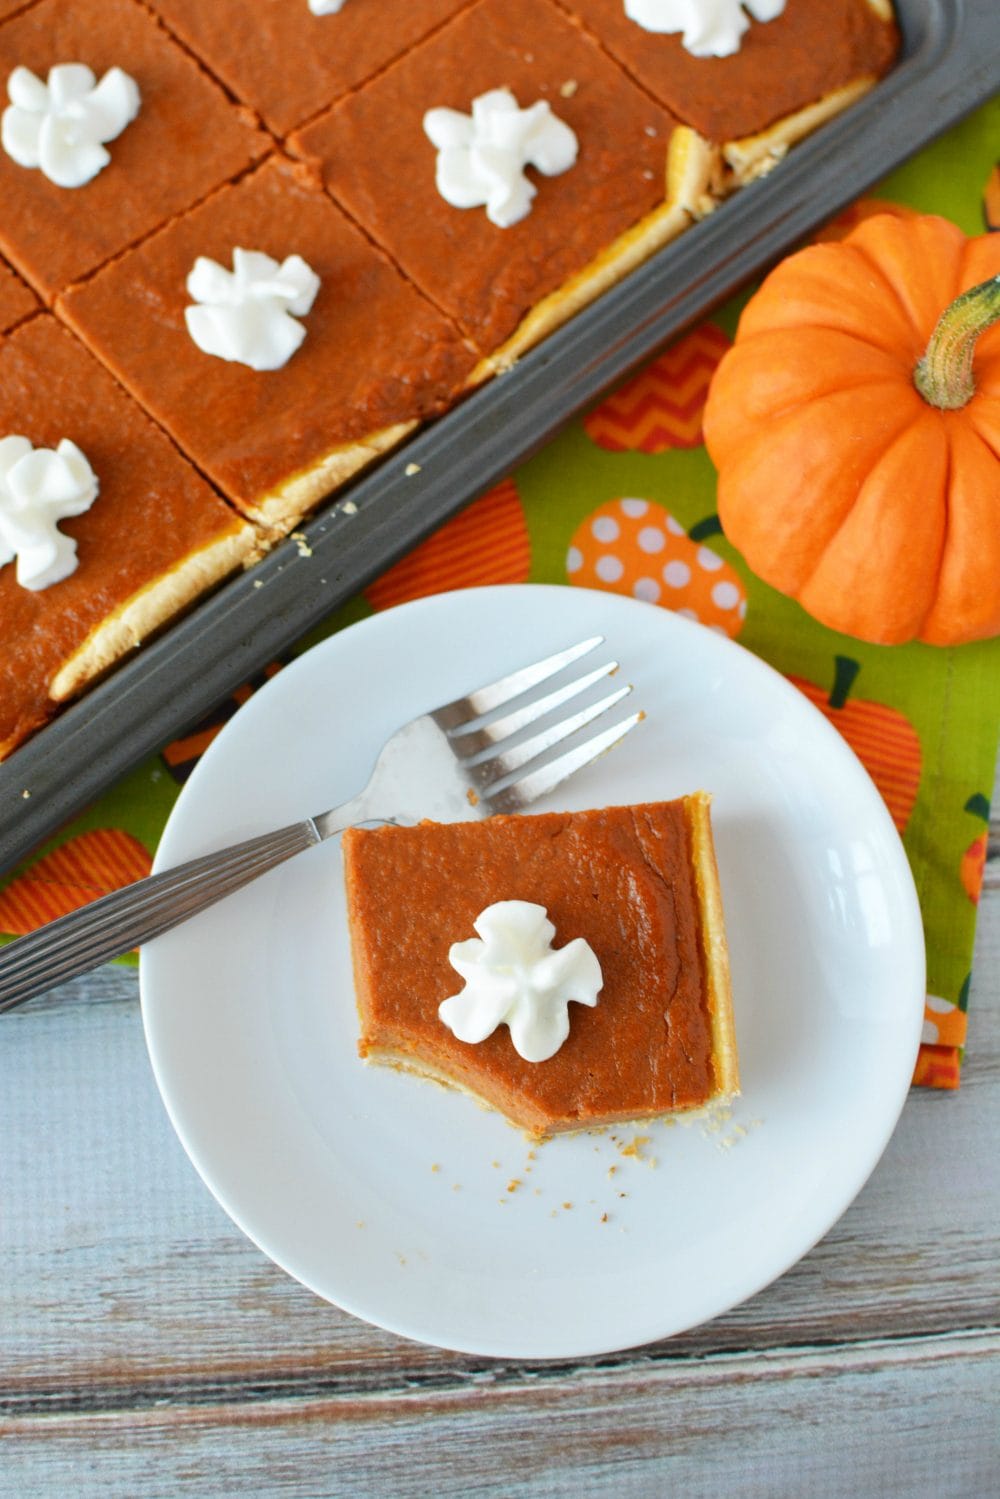 Slice of pumpkin pie on a plate with a bite taken out